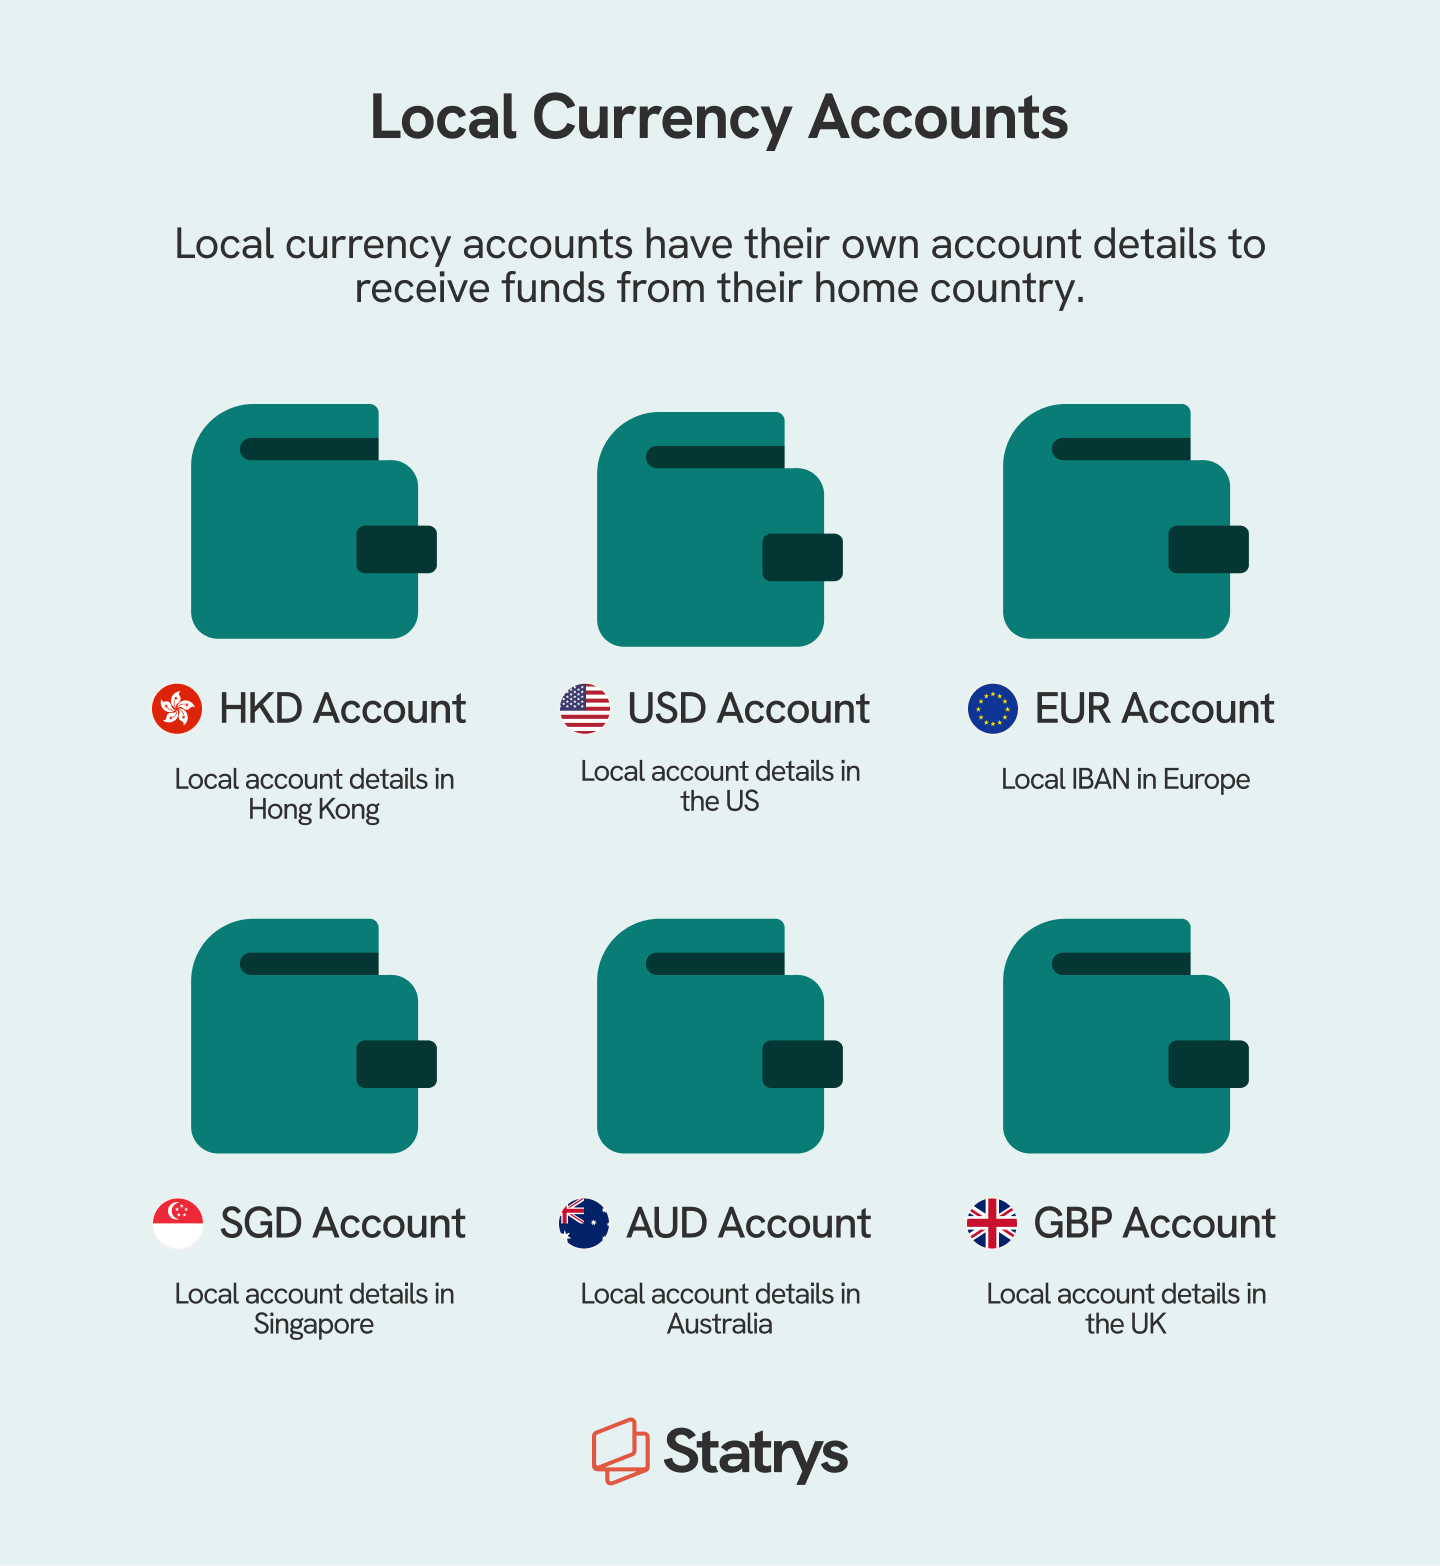 An infographic showing a local currency account